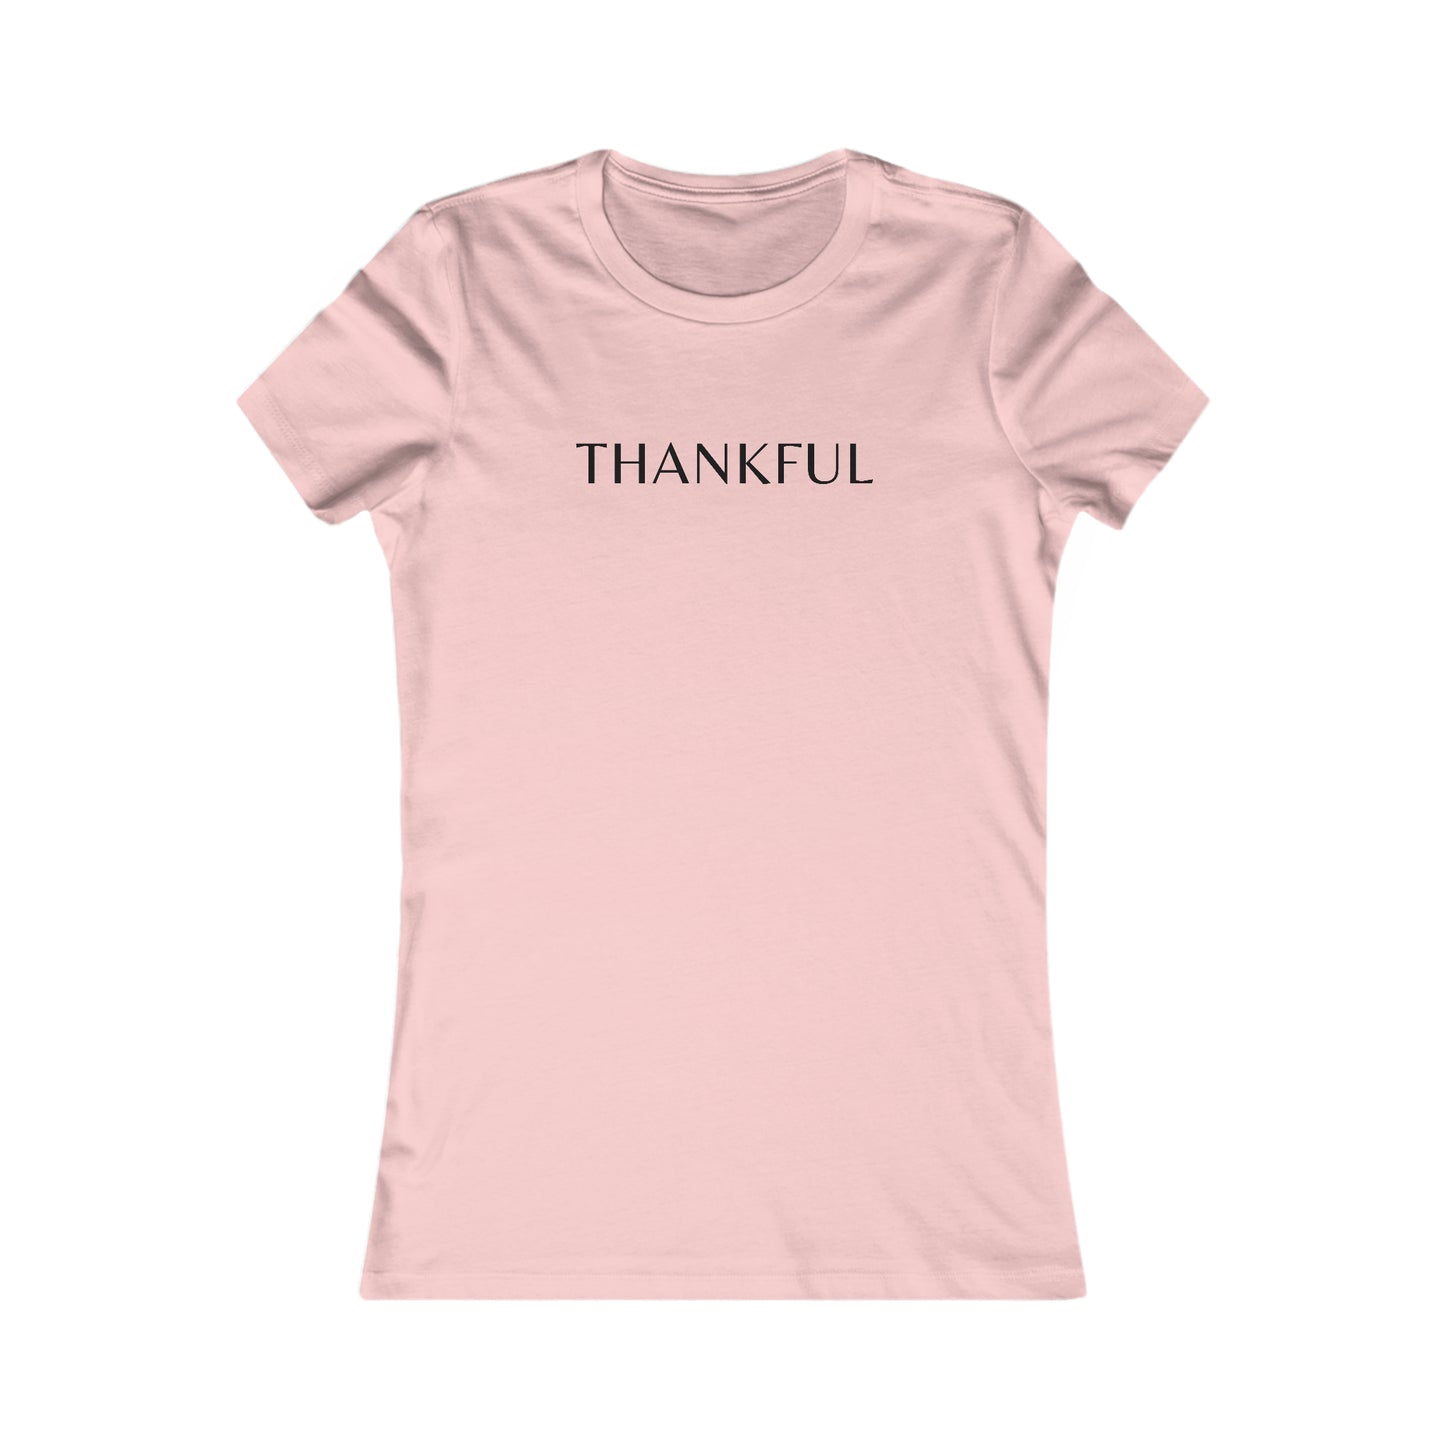 Thankful Fitted Tee